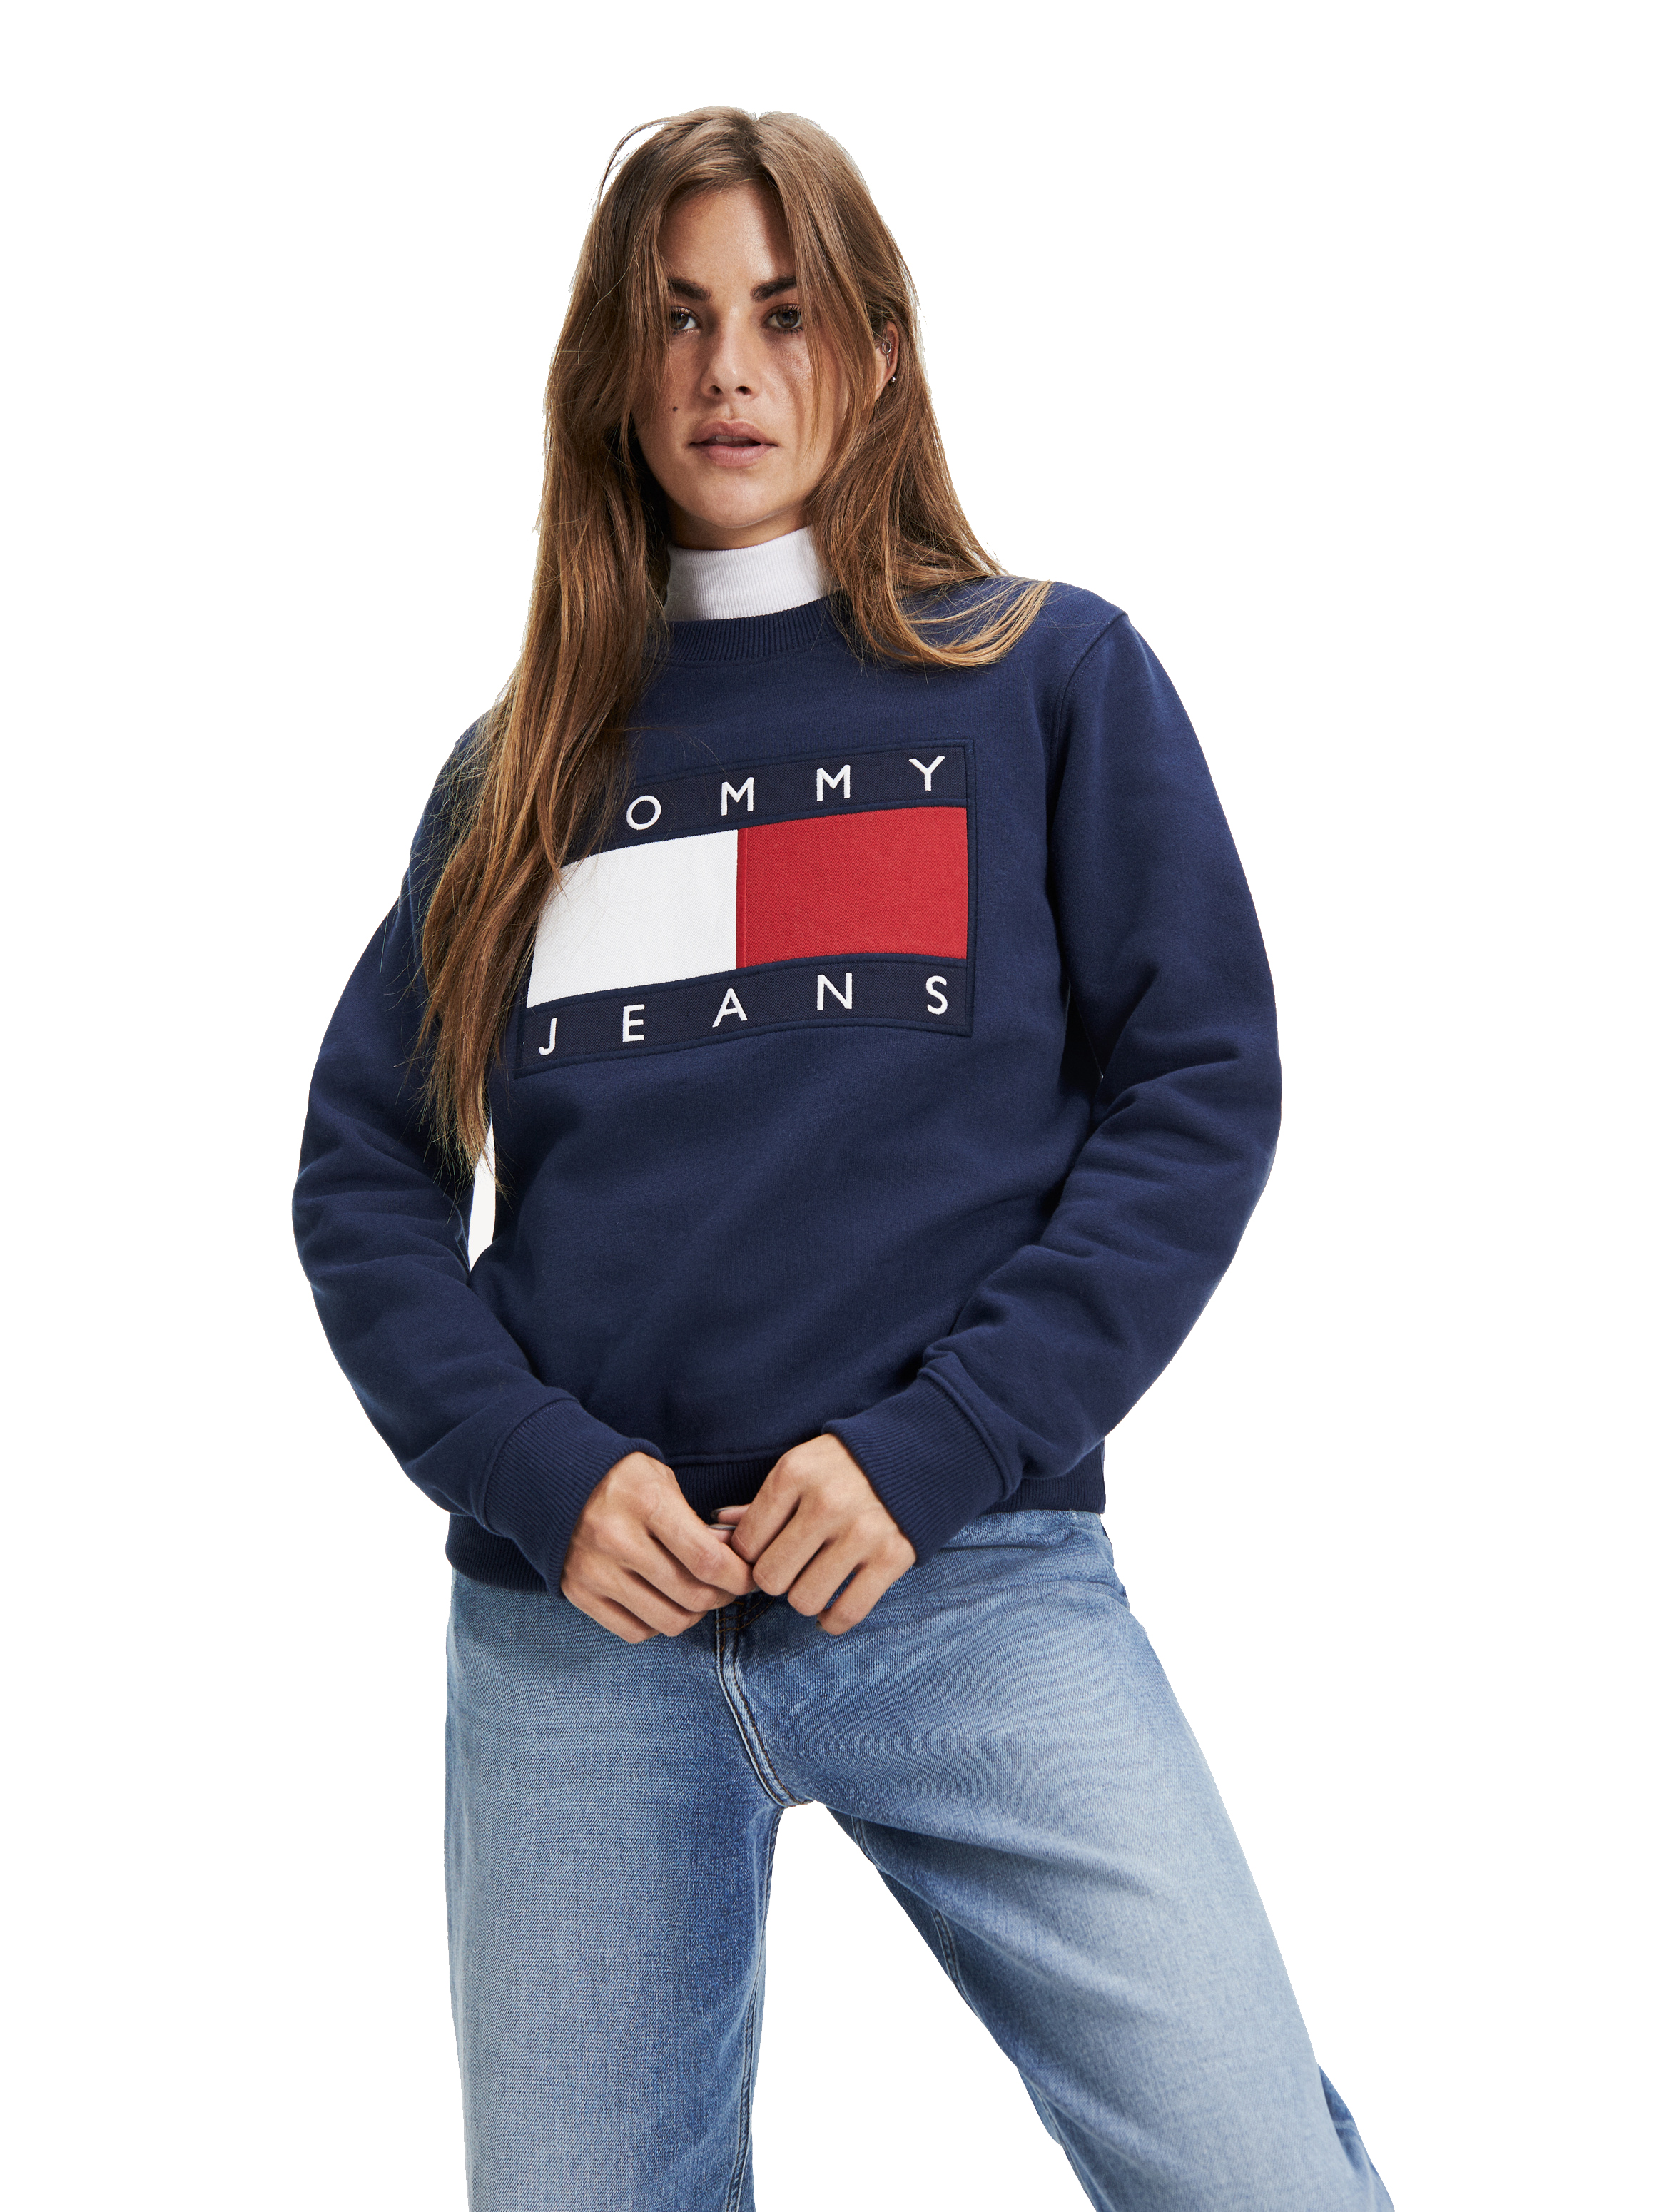 Tommy Hilfiger Hotsell - 1687817953